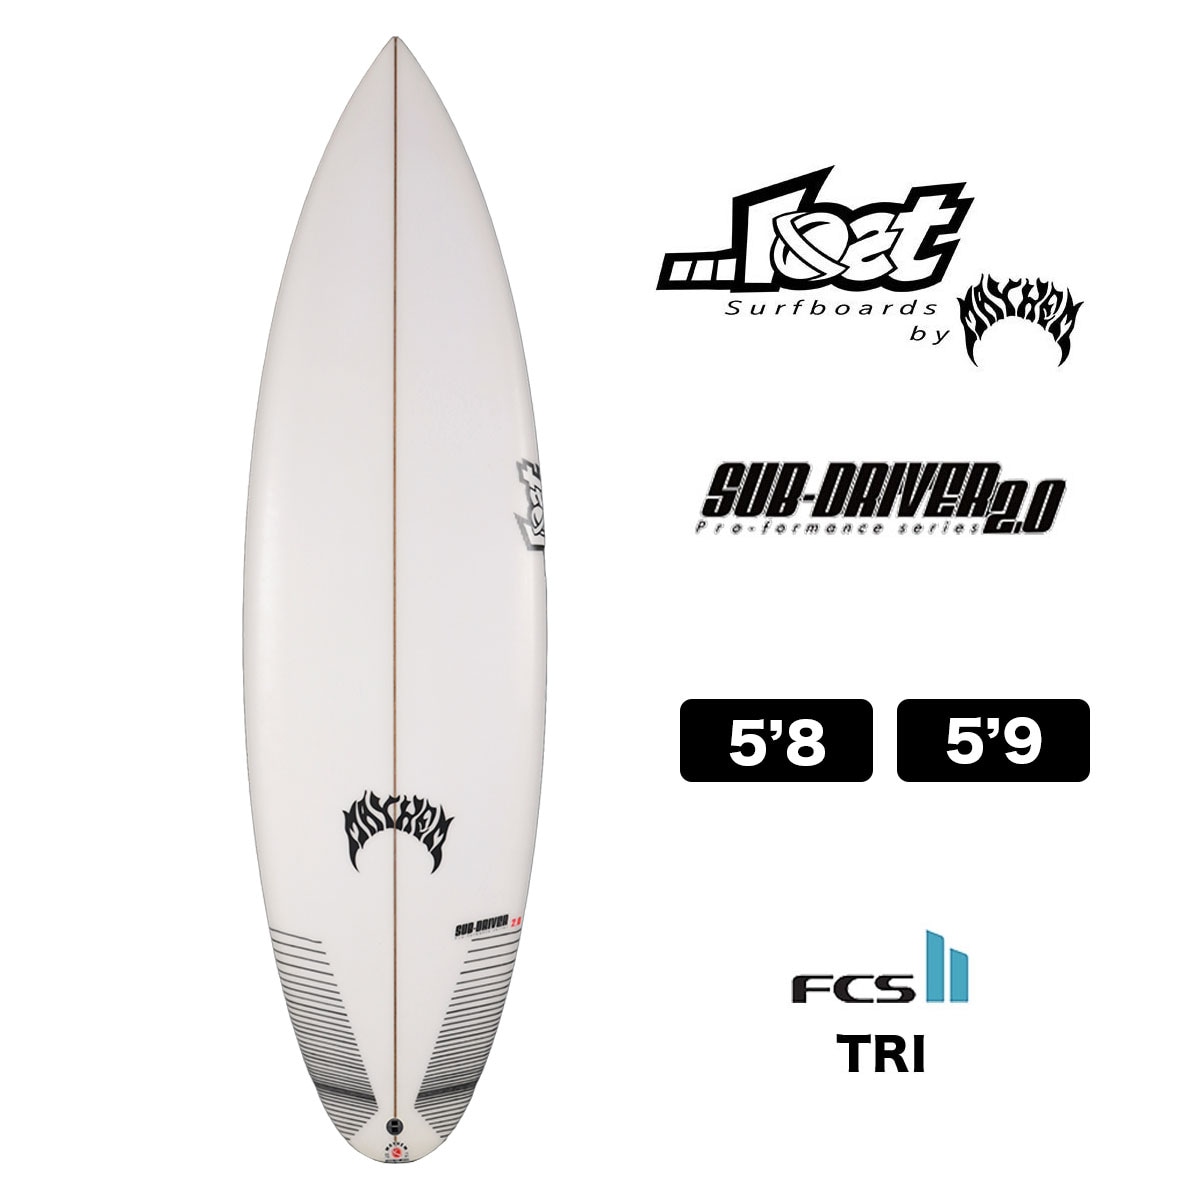 LOST Surfboard キッズ用 - サーフィン